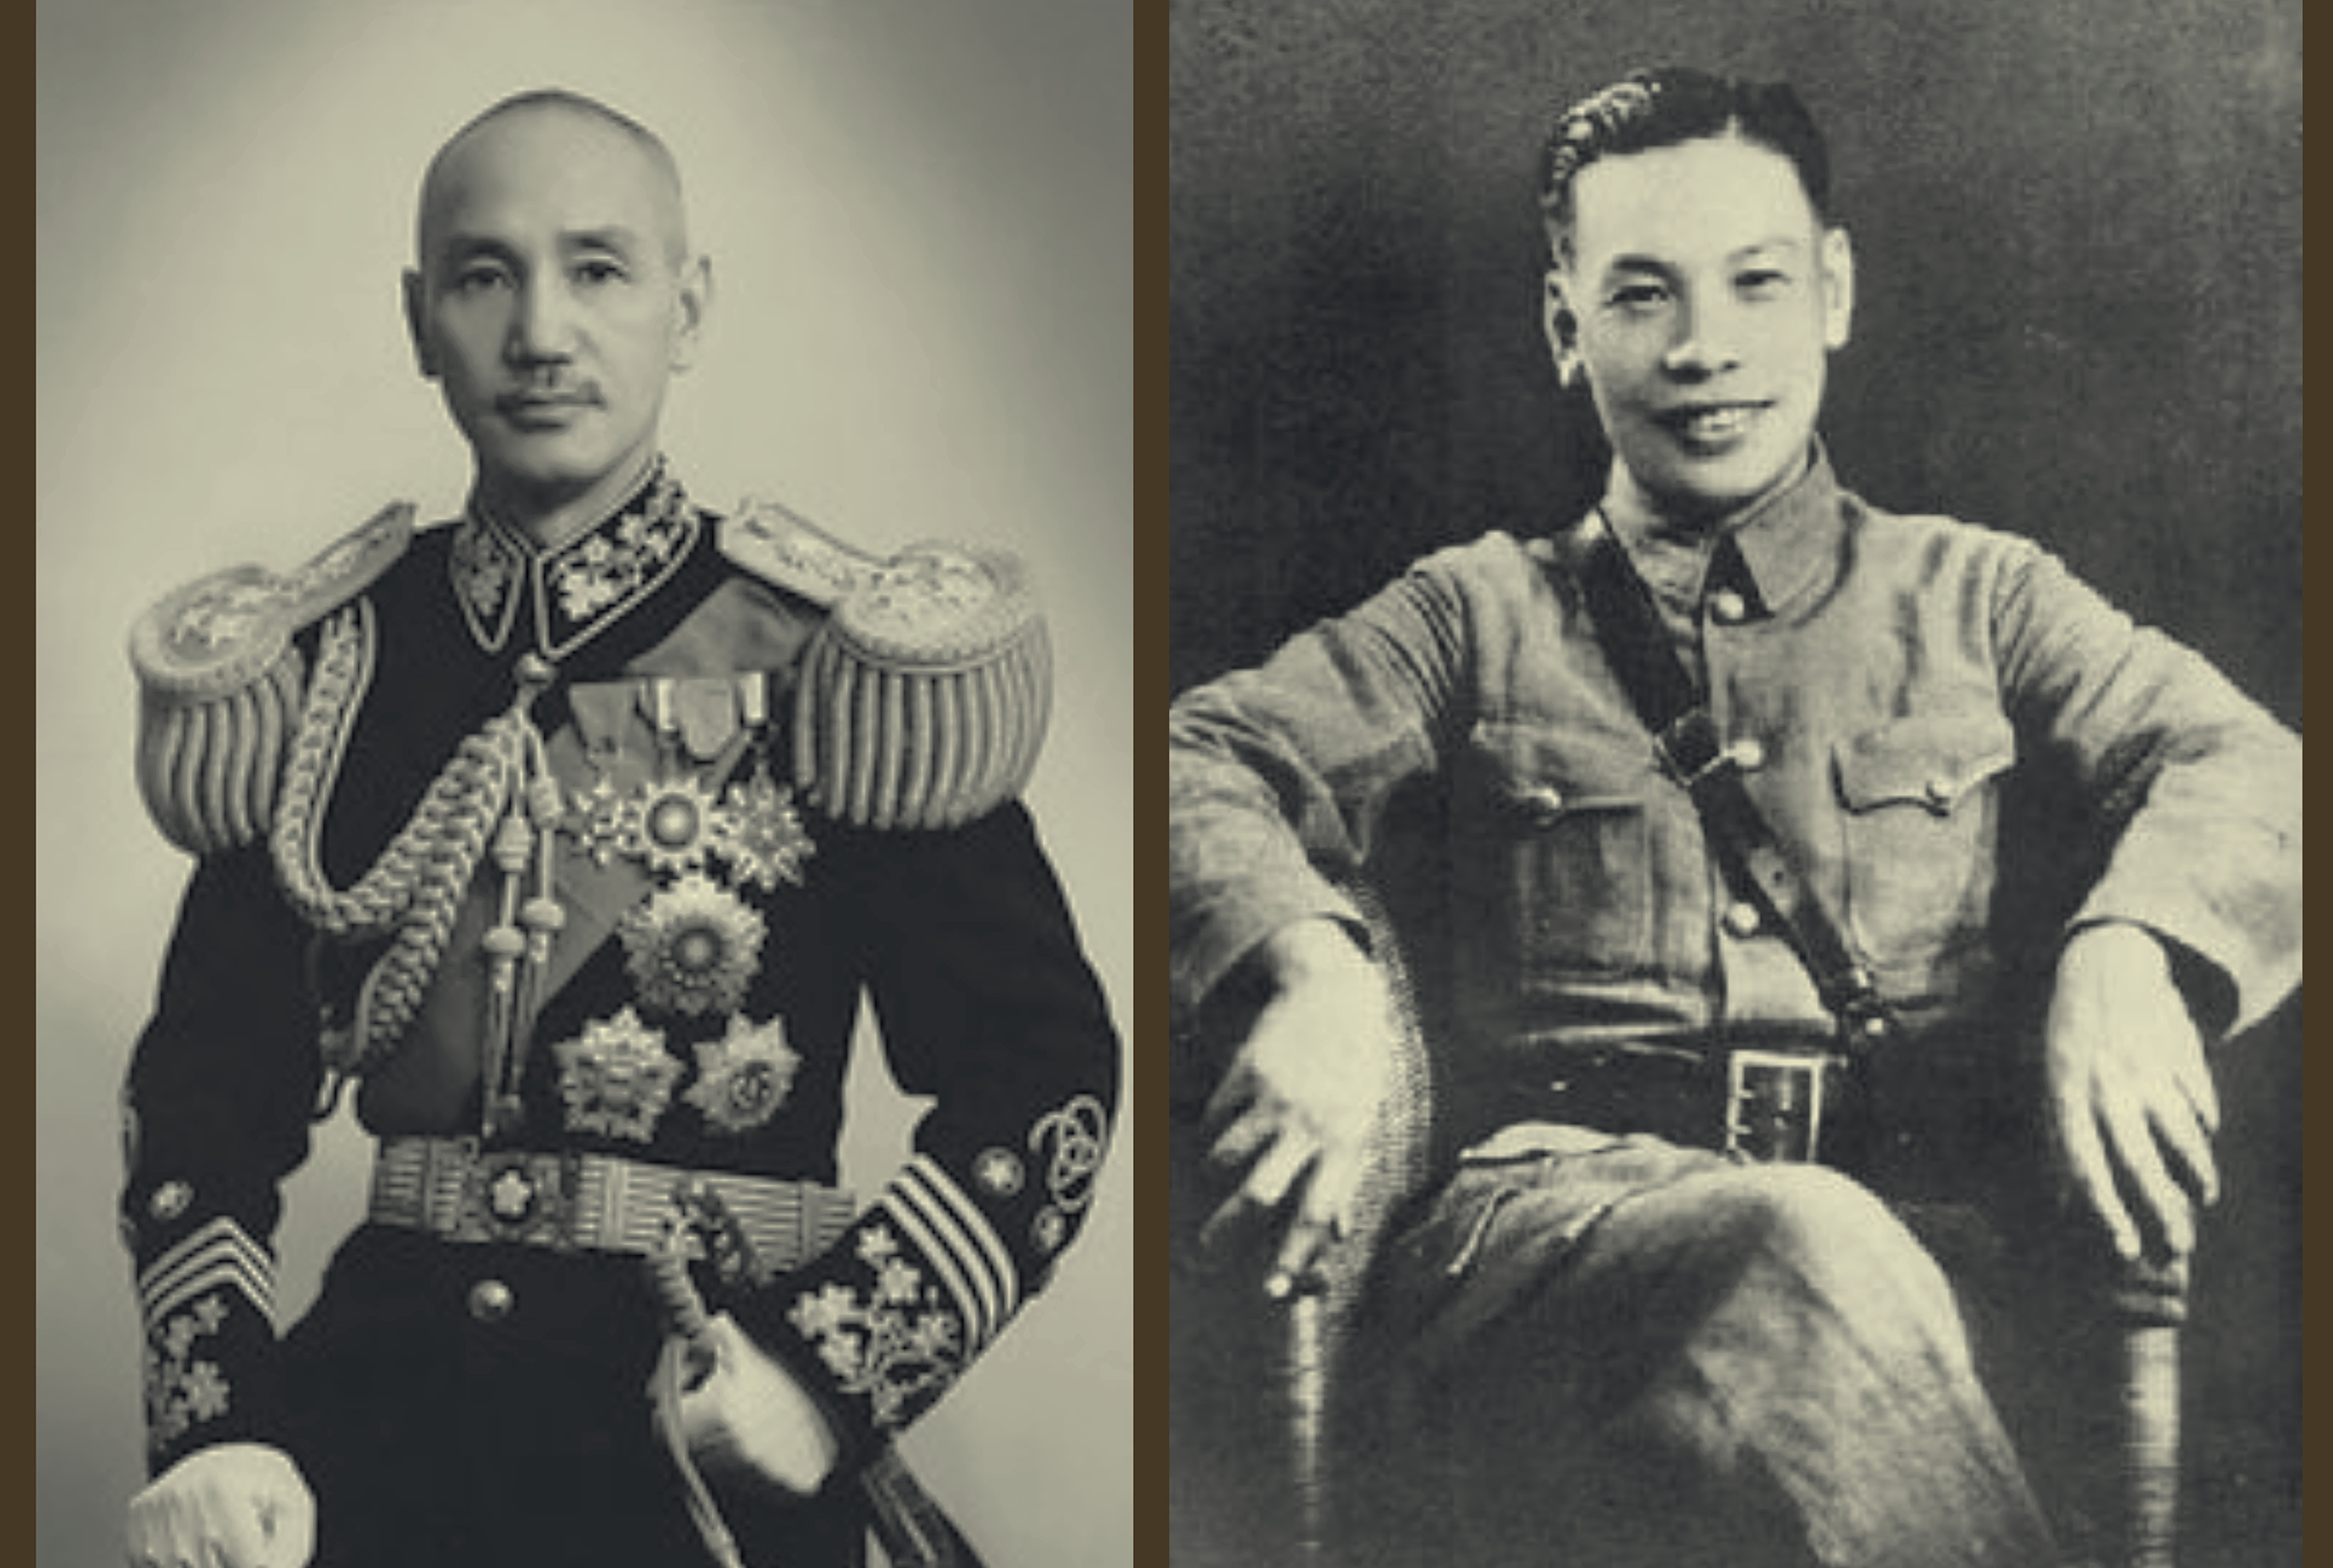 Panel Discussion – The Diaries of Chiang Kai-shek and Chiang Ching-kuo: Historical Reflections